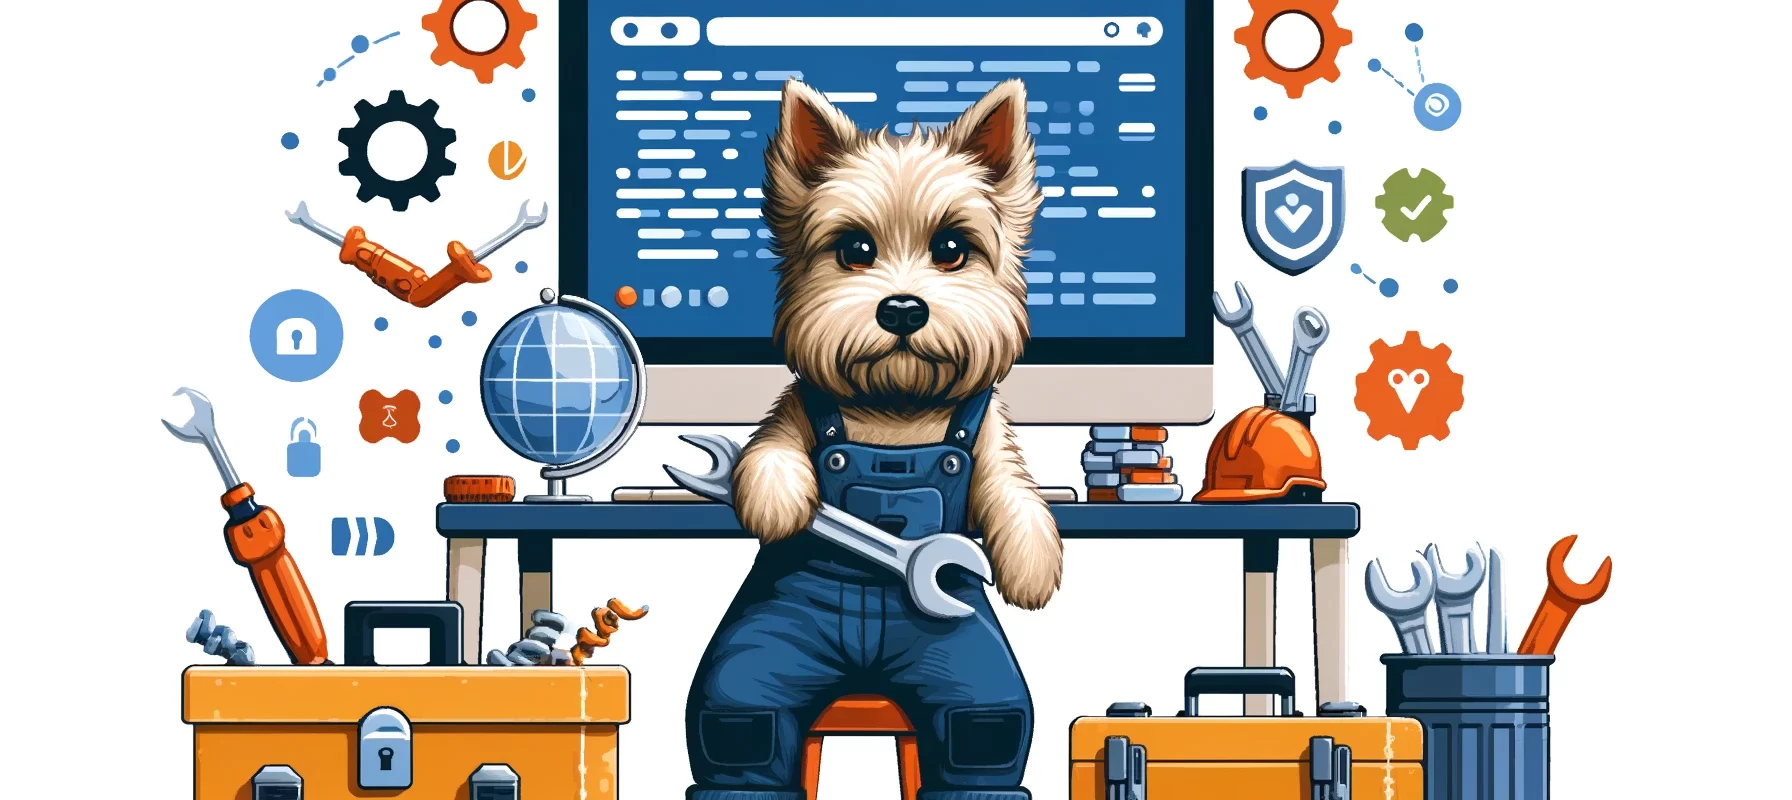 A Scottish Terrier dressed as a mechanic working on a computer, surrounded by tools, representing robust website maintenance services.